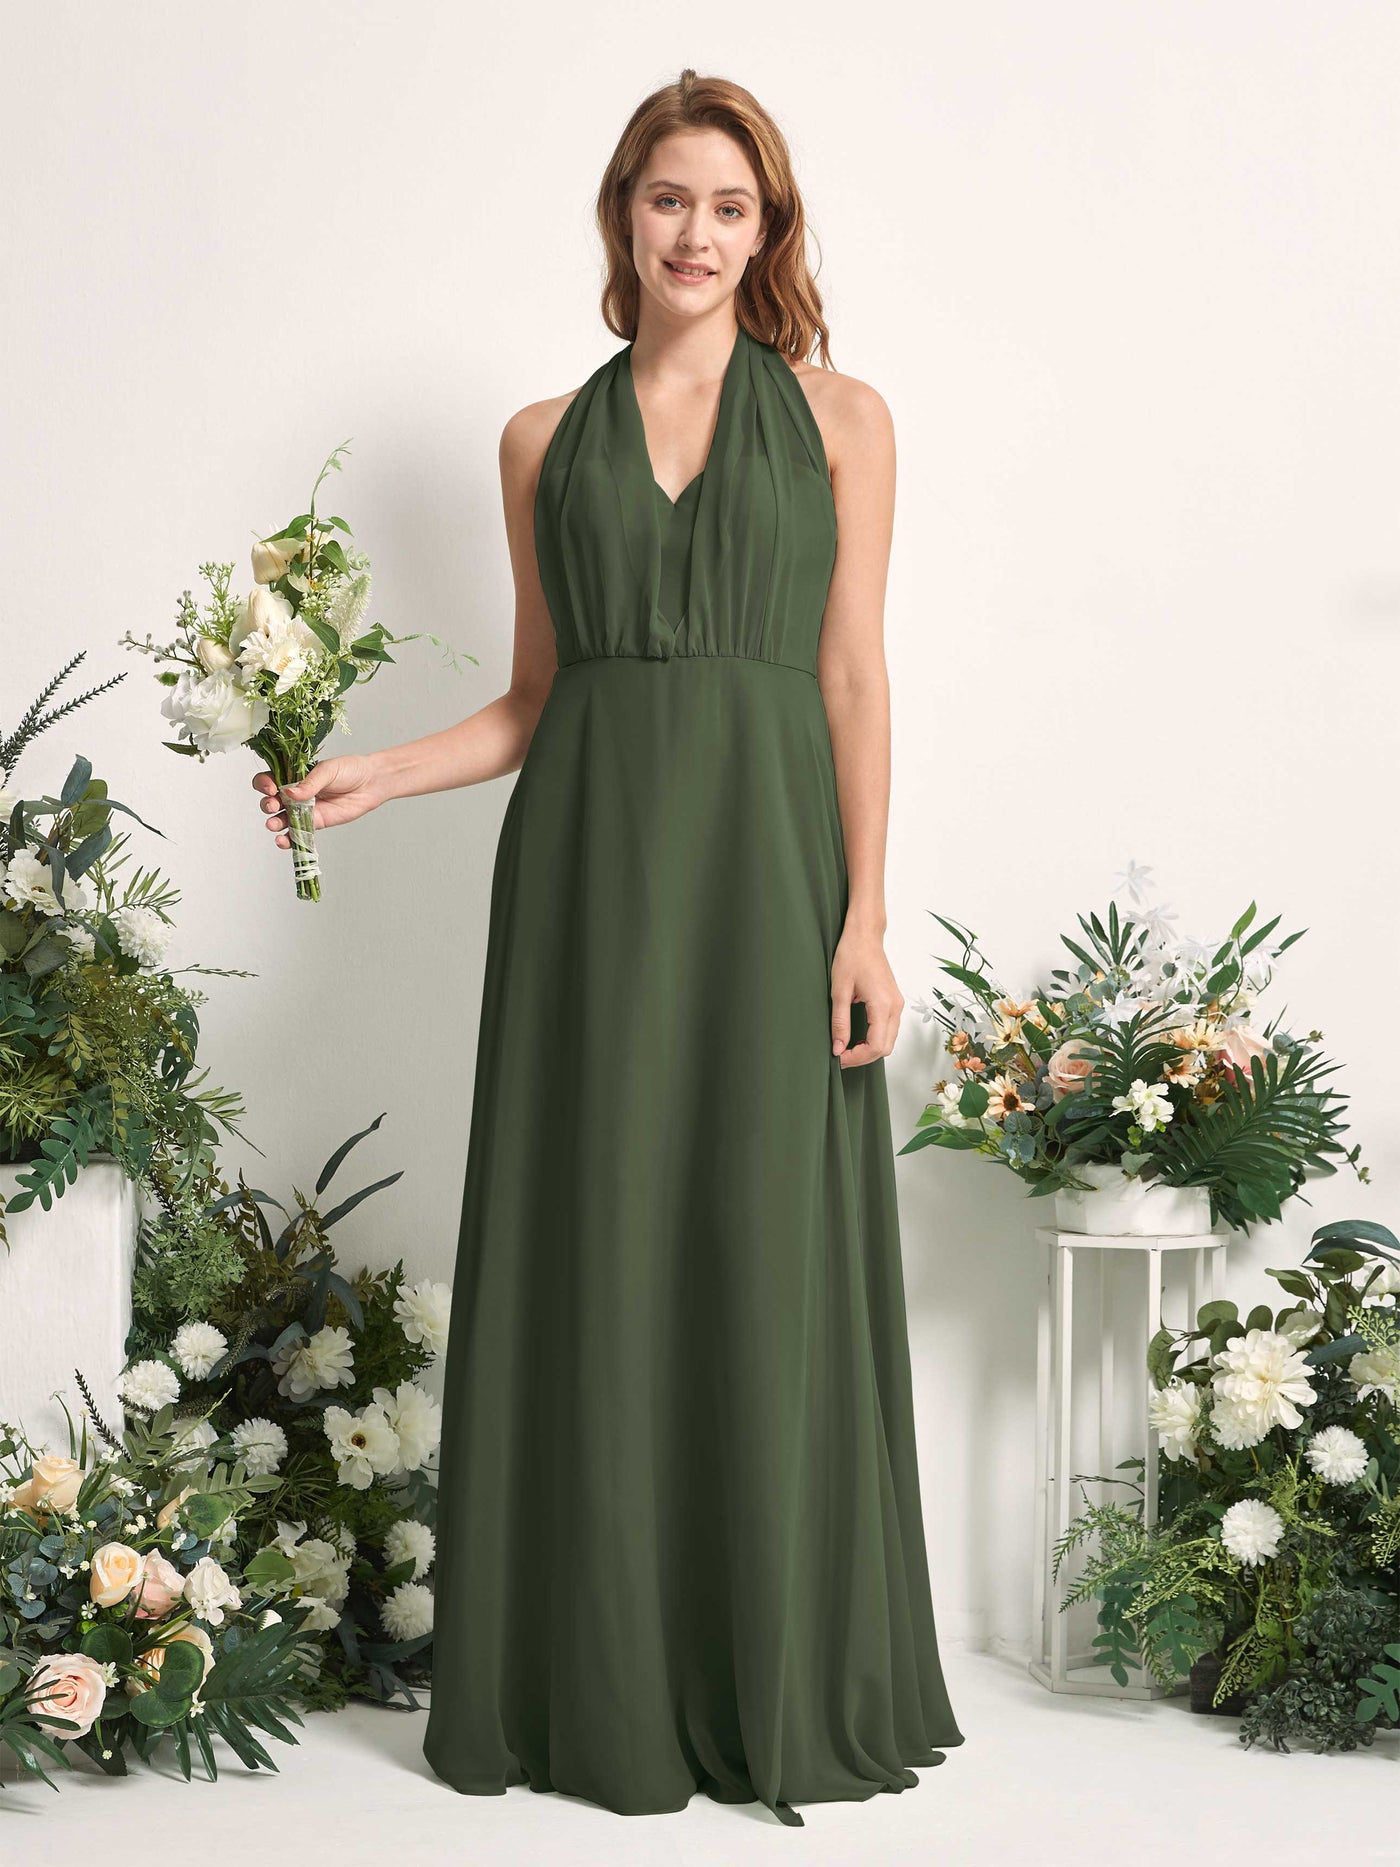 Bridesmaid Dress A-line Chiffon Halter Full Length Short Sleeves Wedding Party Dress - Martini Olive (81226307)#color_martini-olive